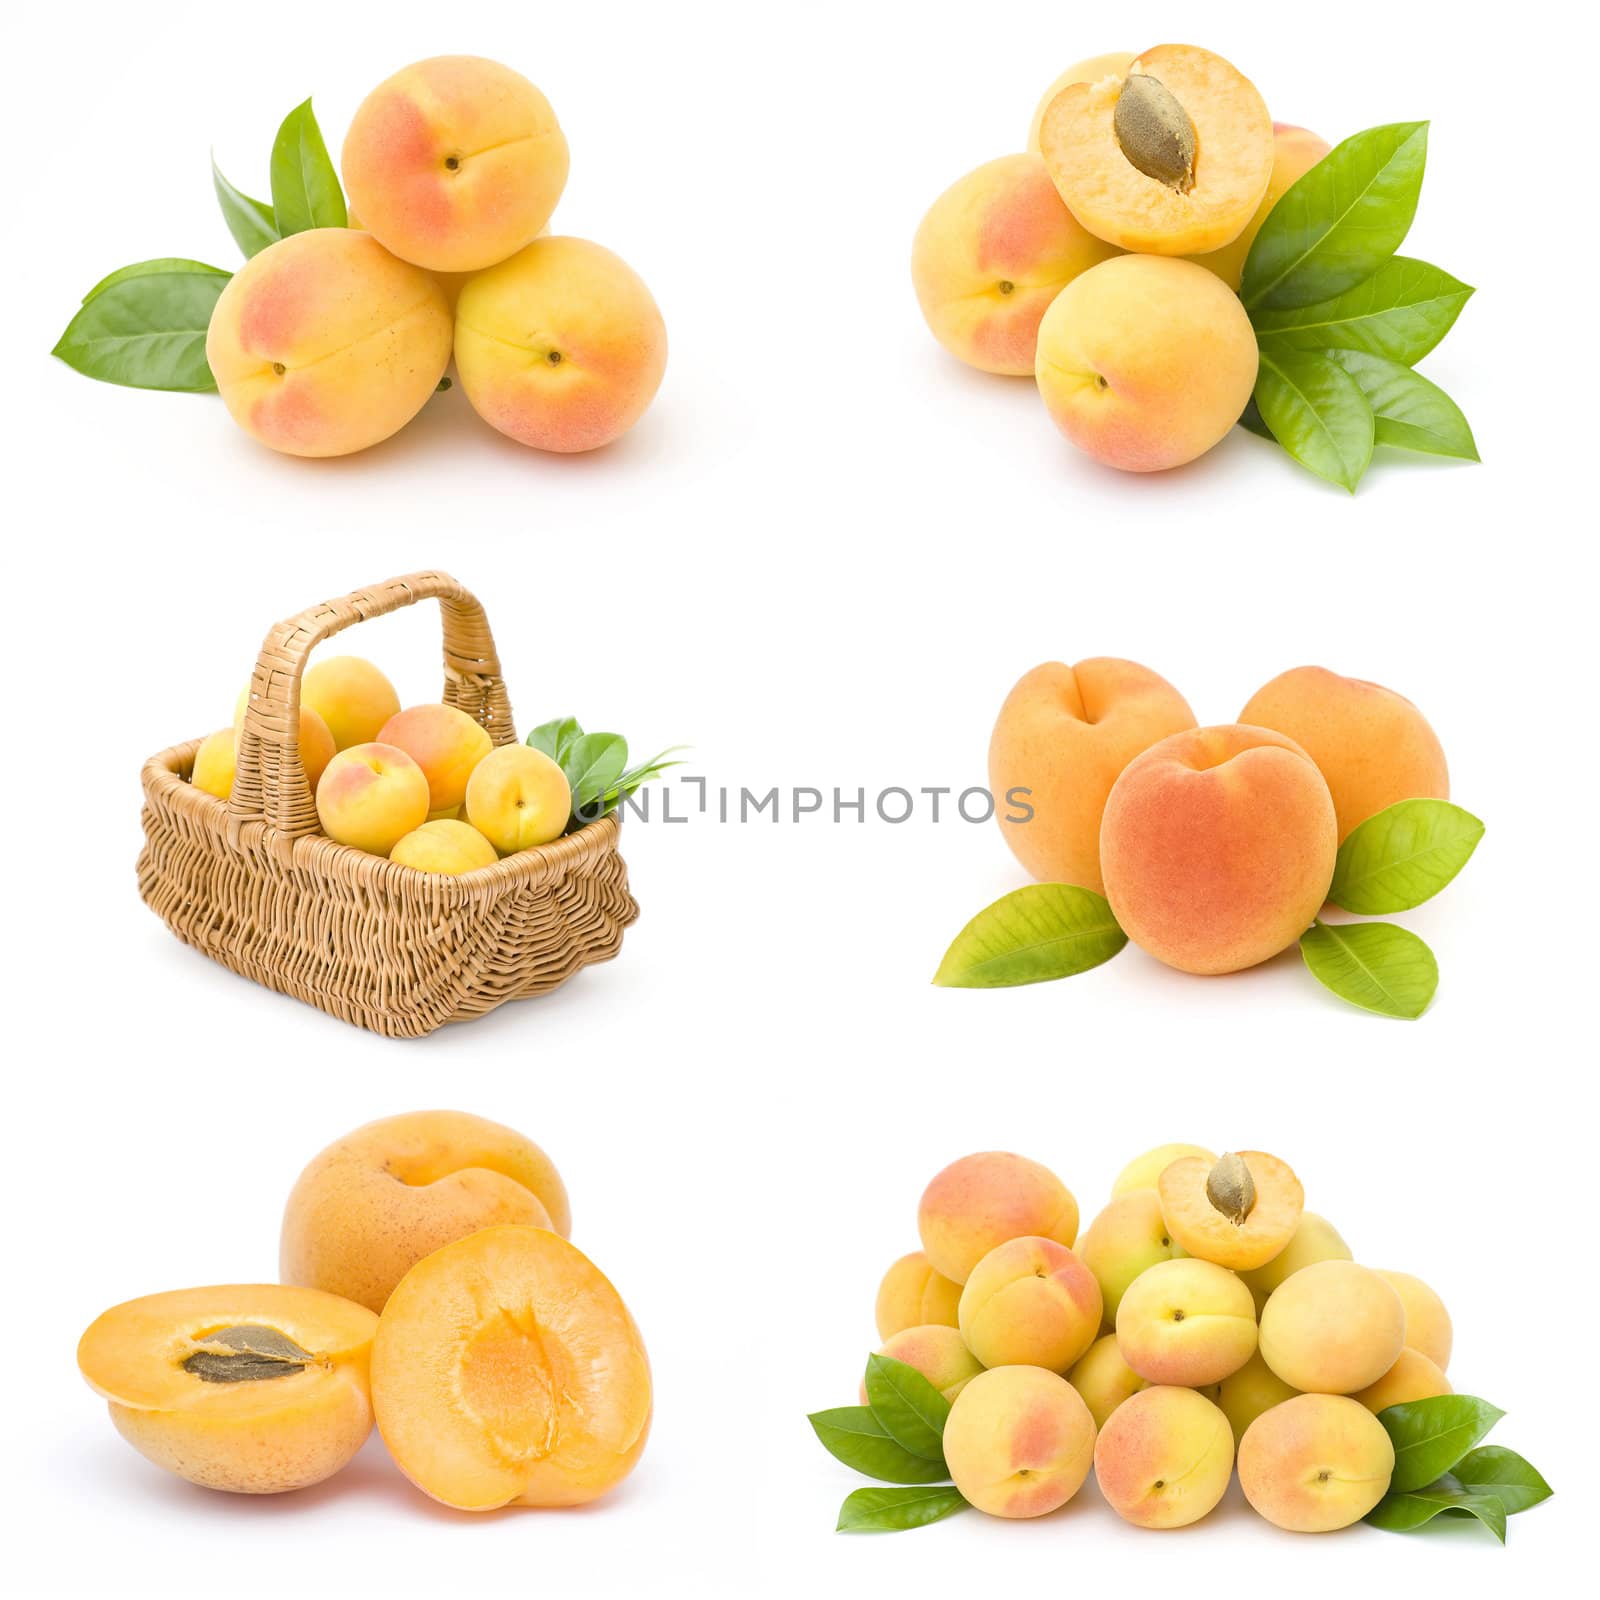 collection of fresh apricot fruits by miradrozdowski